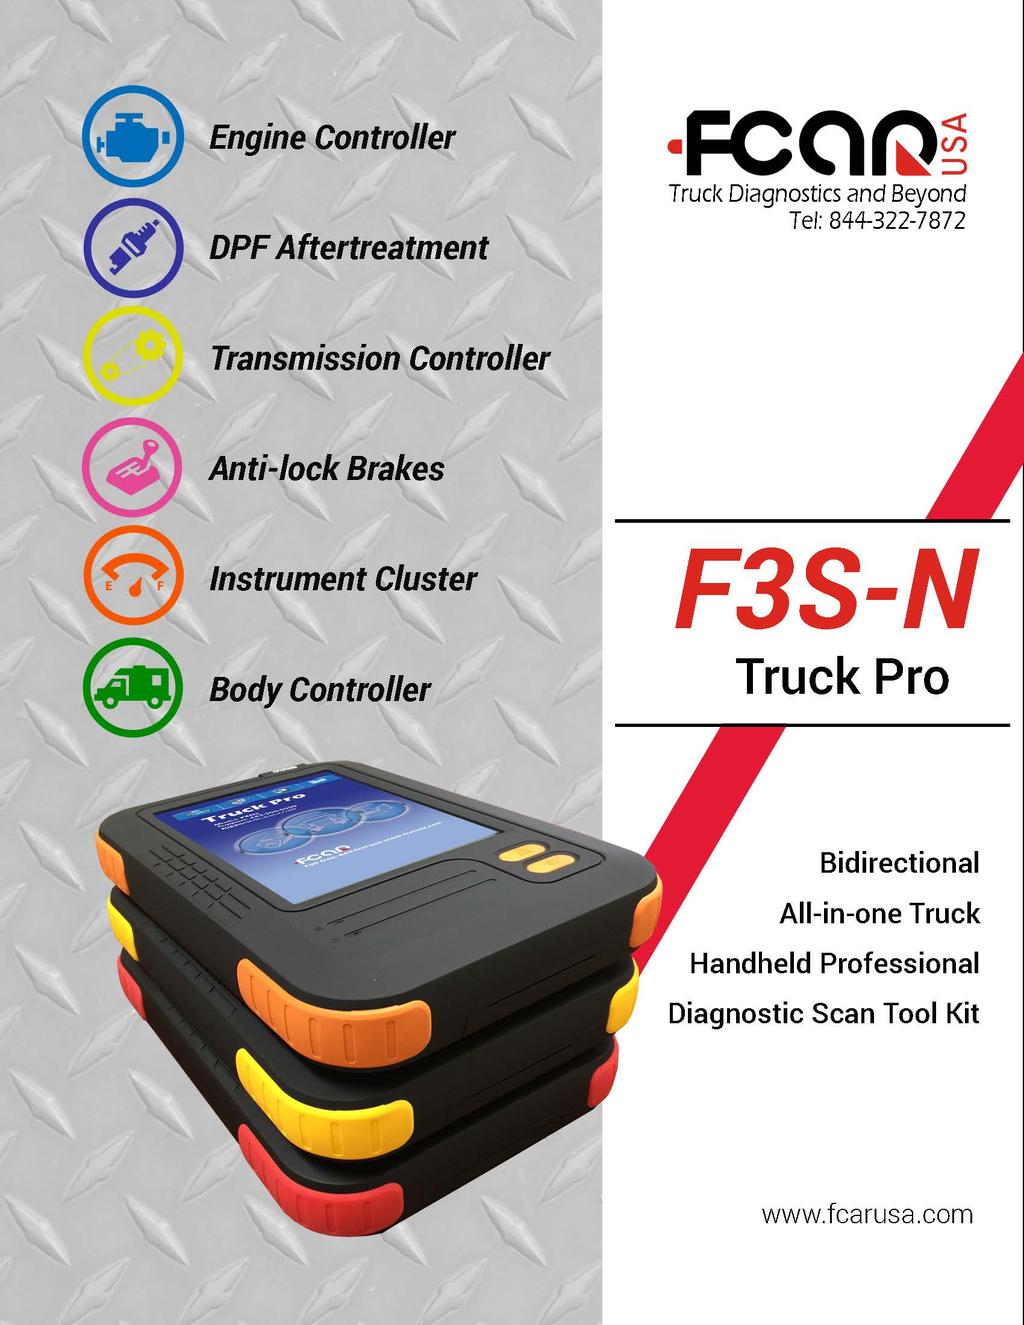 @ 0 Engine Controller DPF Aftertreatment Transmission Controller FCaQ ~ Trucl< Diagnostics and Beyond Tel: 844-322-7872 @ @ @ Anti-lock Brakes